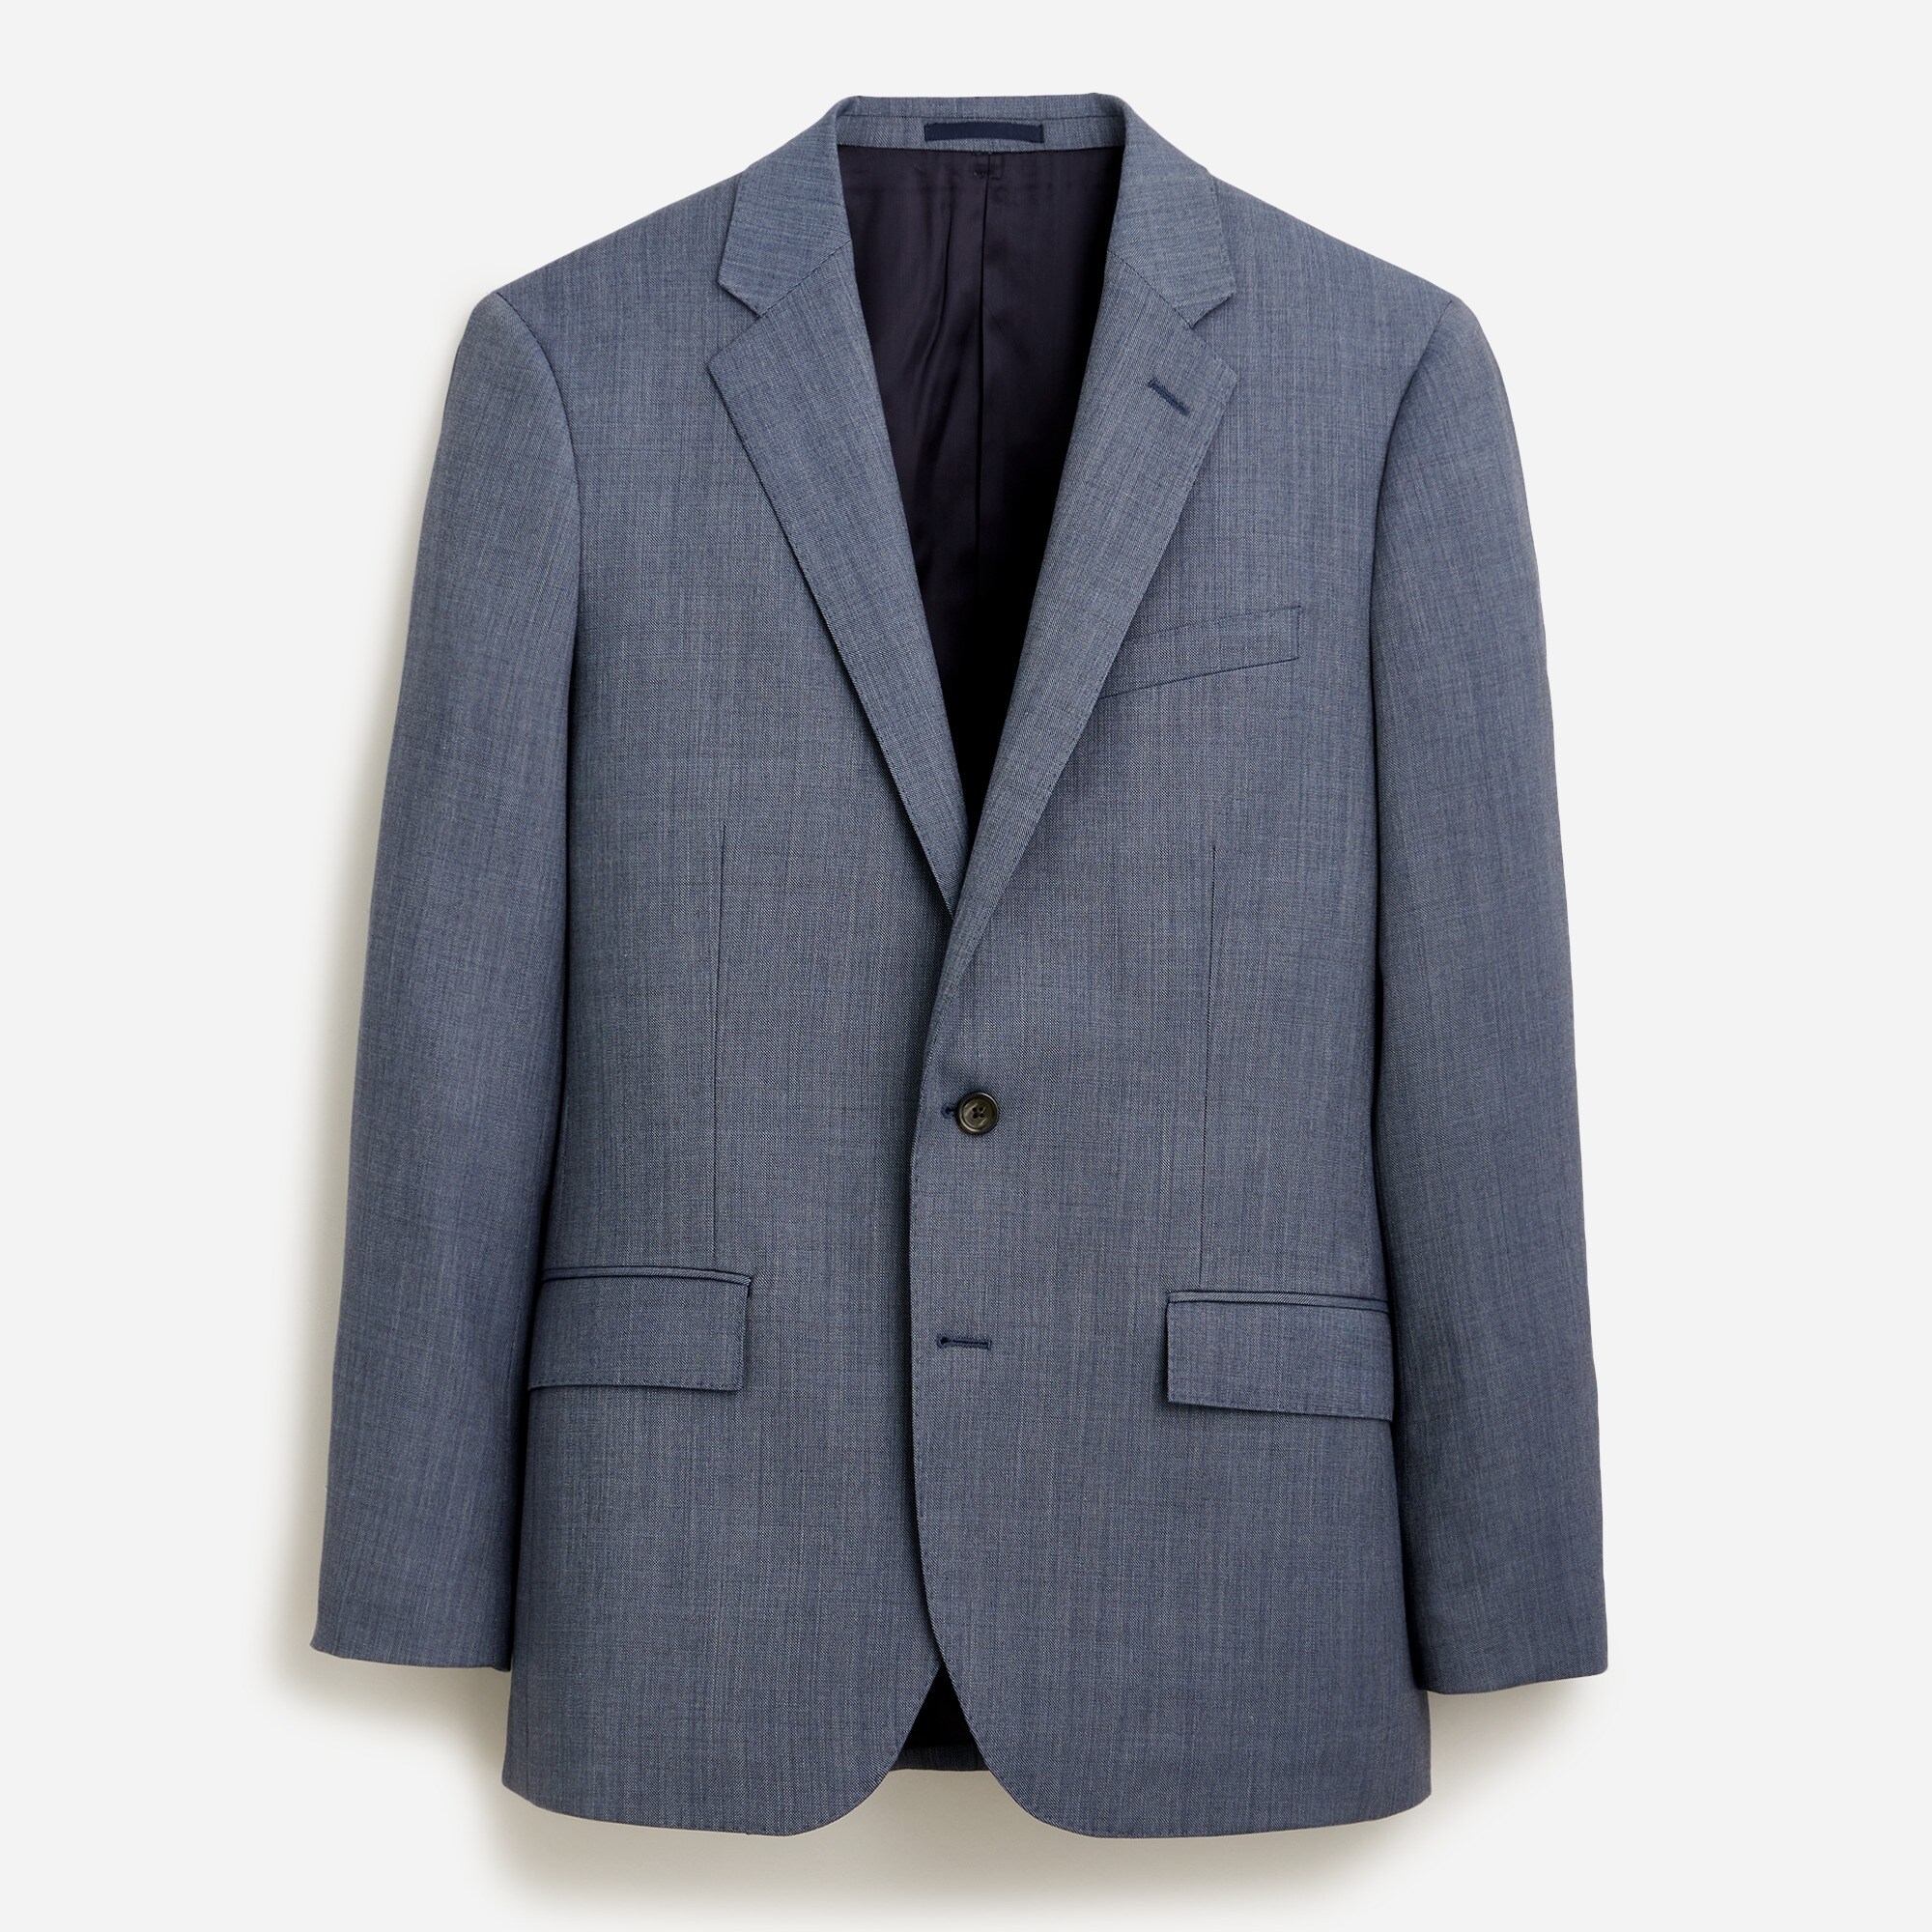 mens Ludlow Slim-fit suit jacket in Italian stretch worsted wool